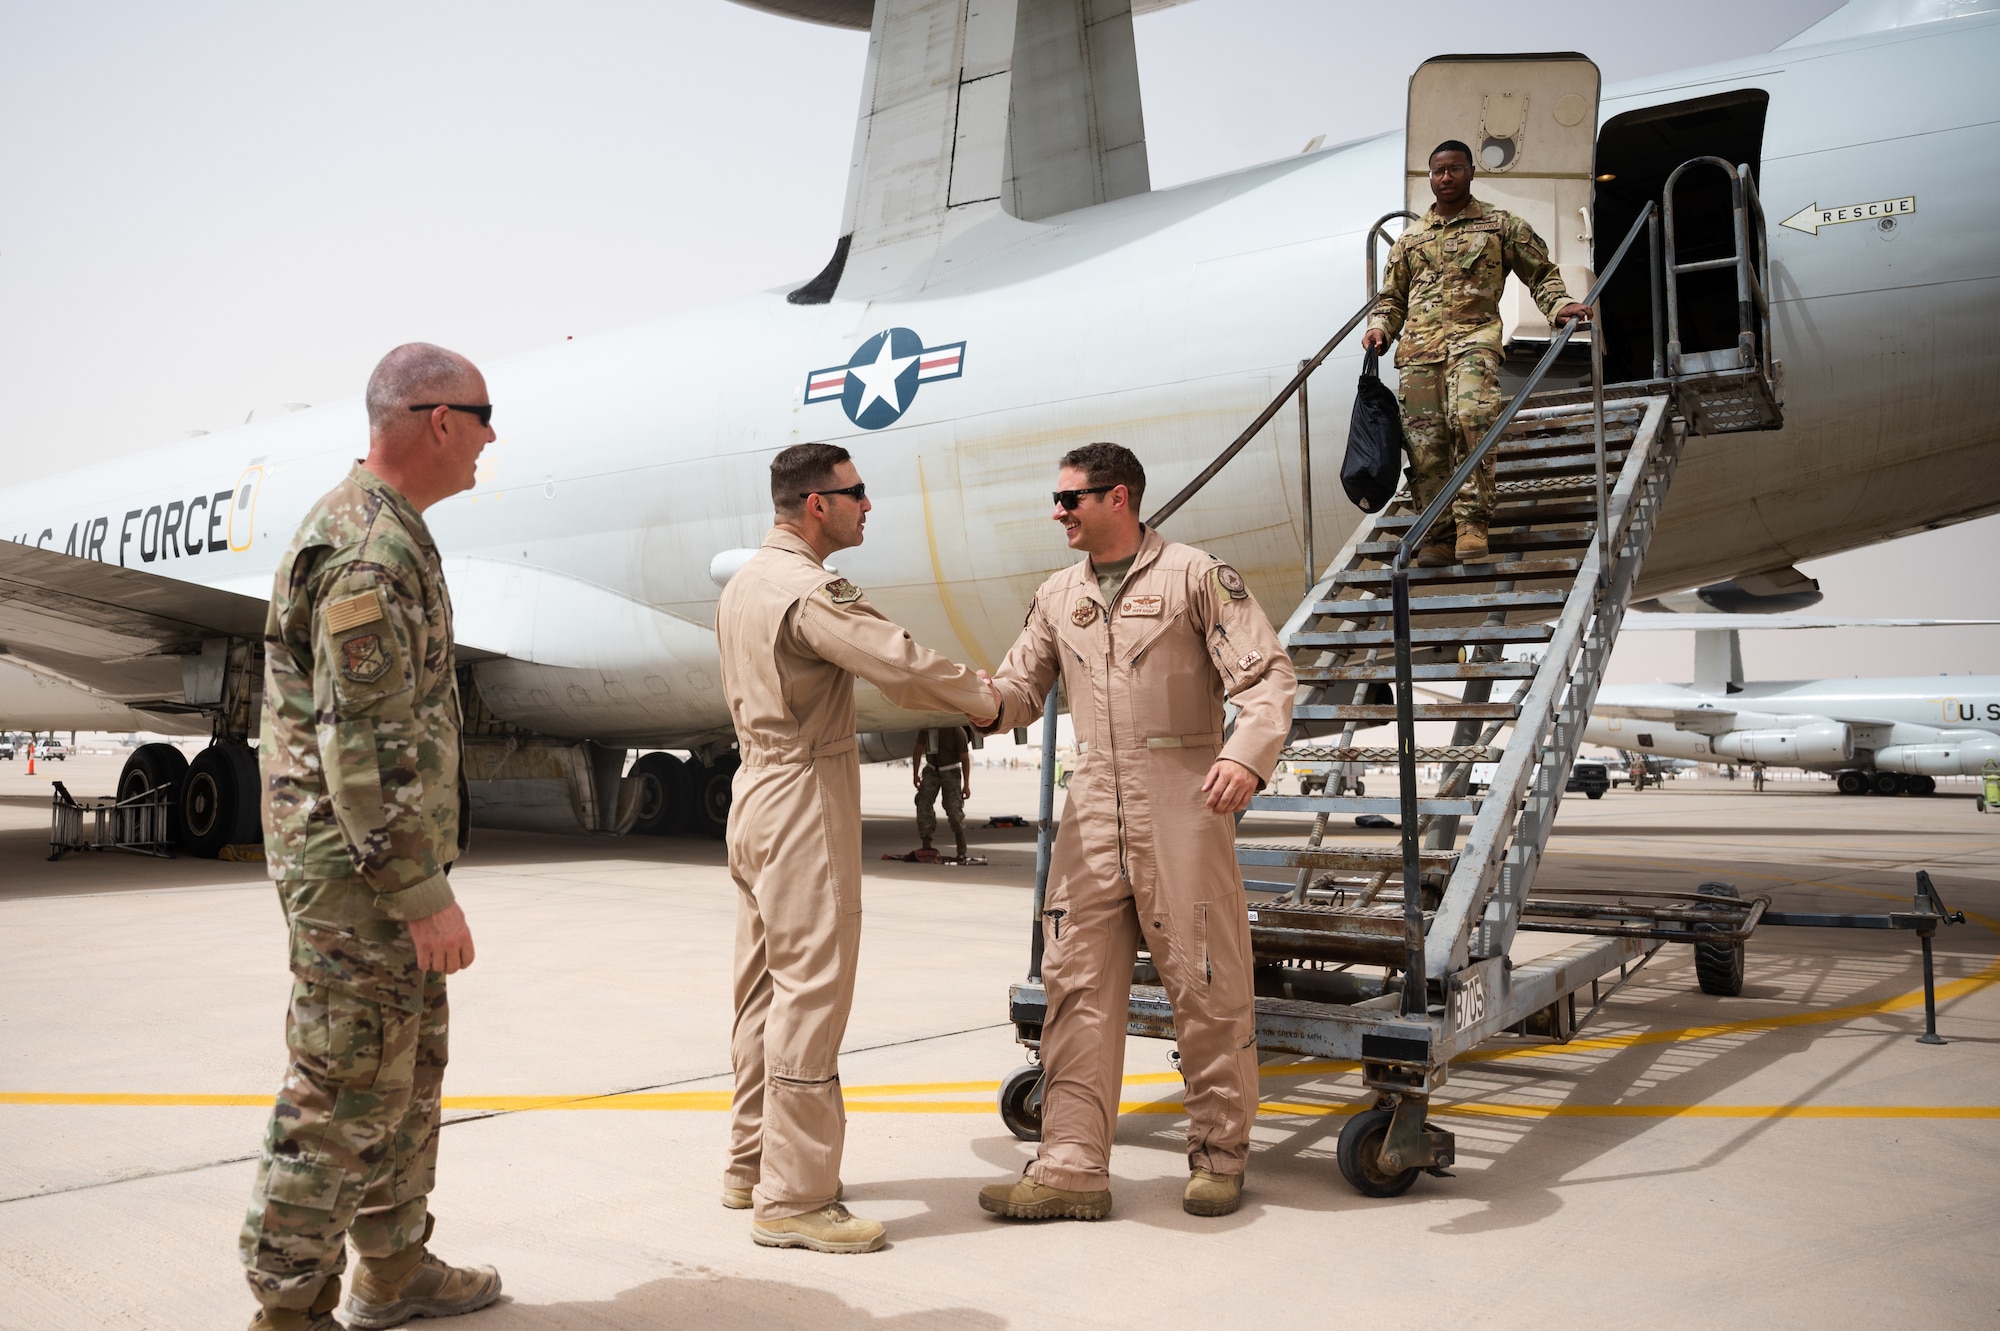 U.S. Air Force Brig. Gen. Robert Davis, 378th Air Expeditionary Wing commander, greets U.S. Air Force Lt. Col. Steven Bailey, 968th Expeditionary Airborne Air Control Squadron commander, at Prince Sultan Air Base, Kingdom of Saudi Arabia, March 6, 2022. Previously stationed at Al Dhafra Air Base, United Arab Emirates, the 968th EAACS will now begin operating from PSAB. (U.S. Air Force photo by Senior Airman Jacob B. Wrightsman)